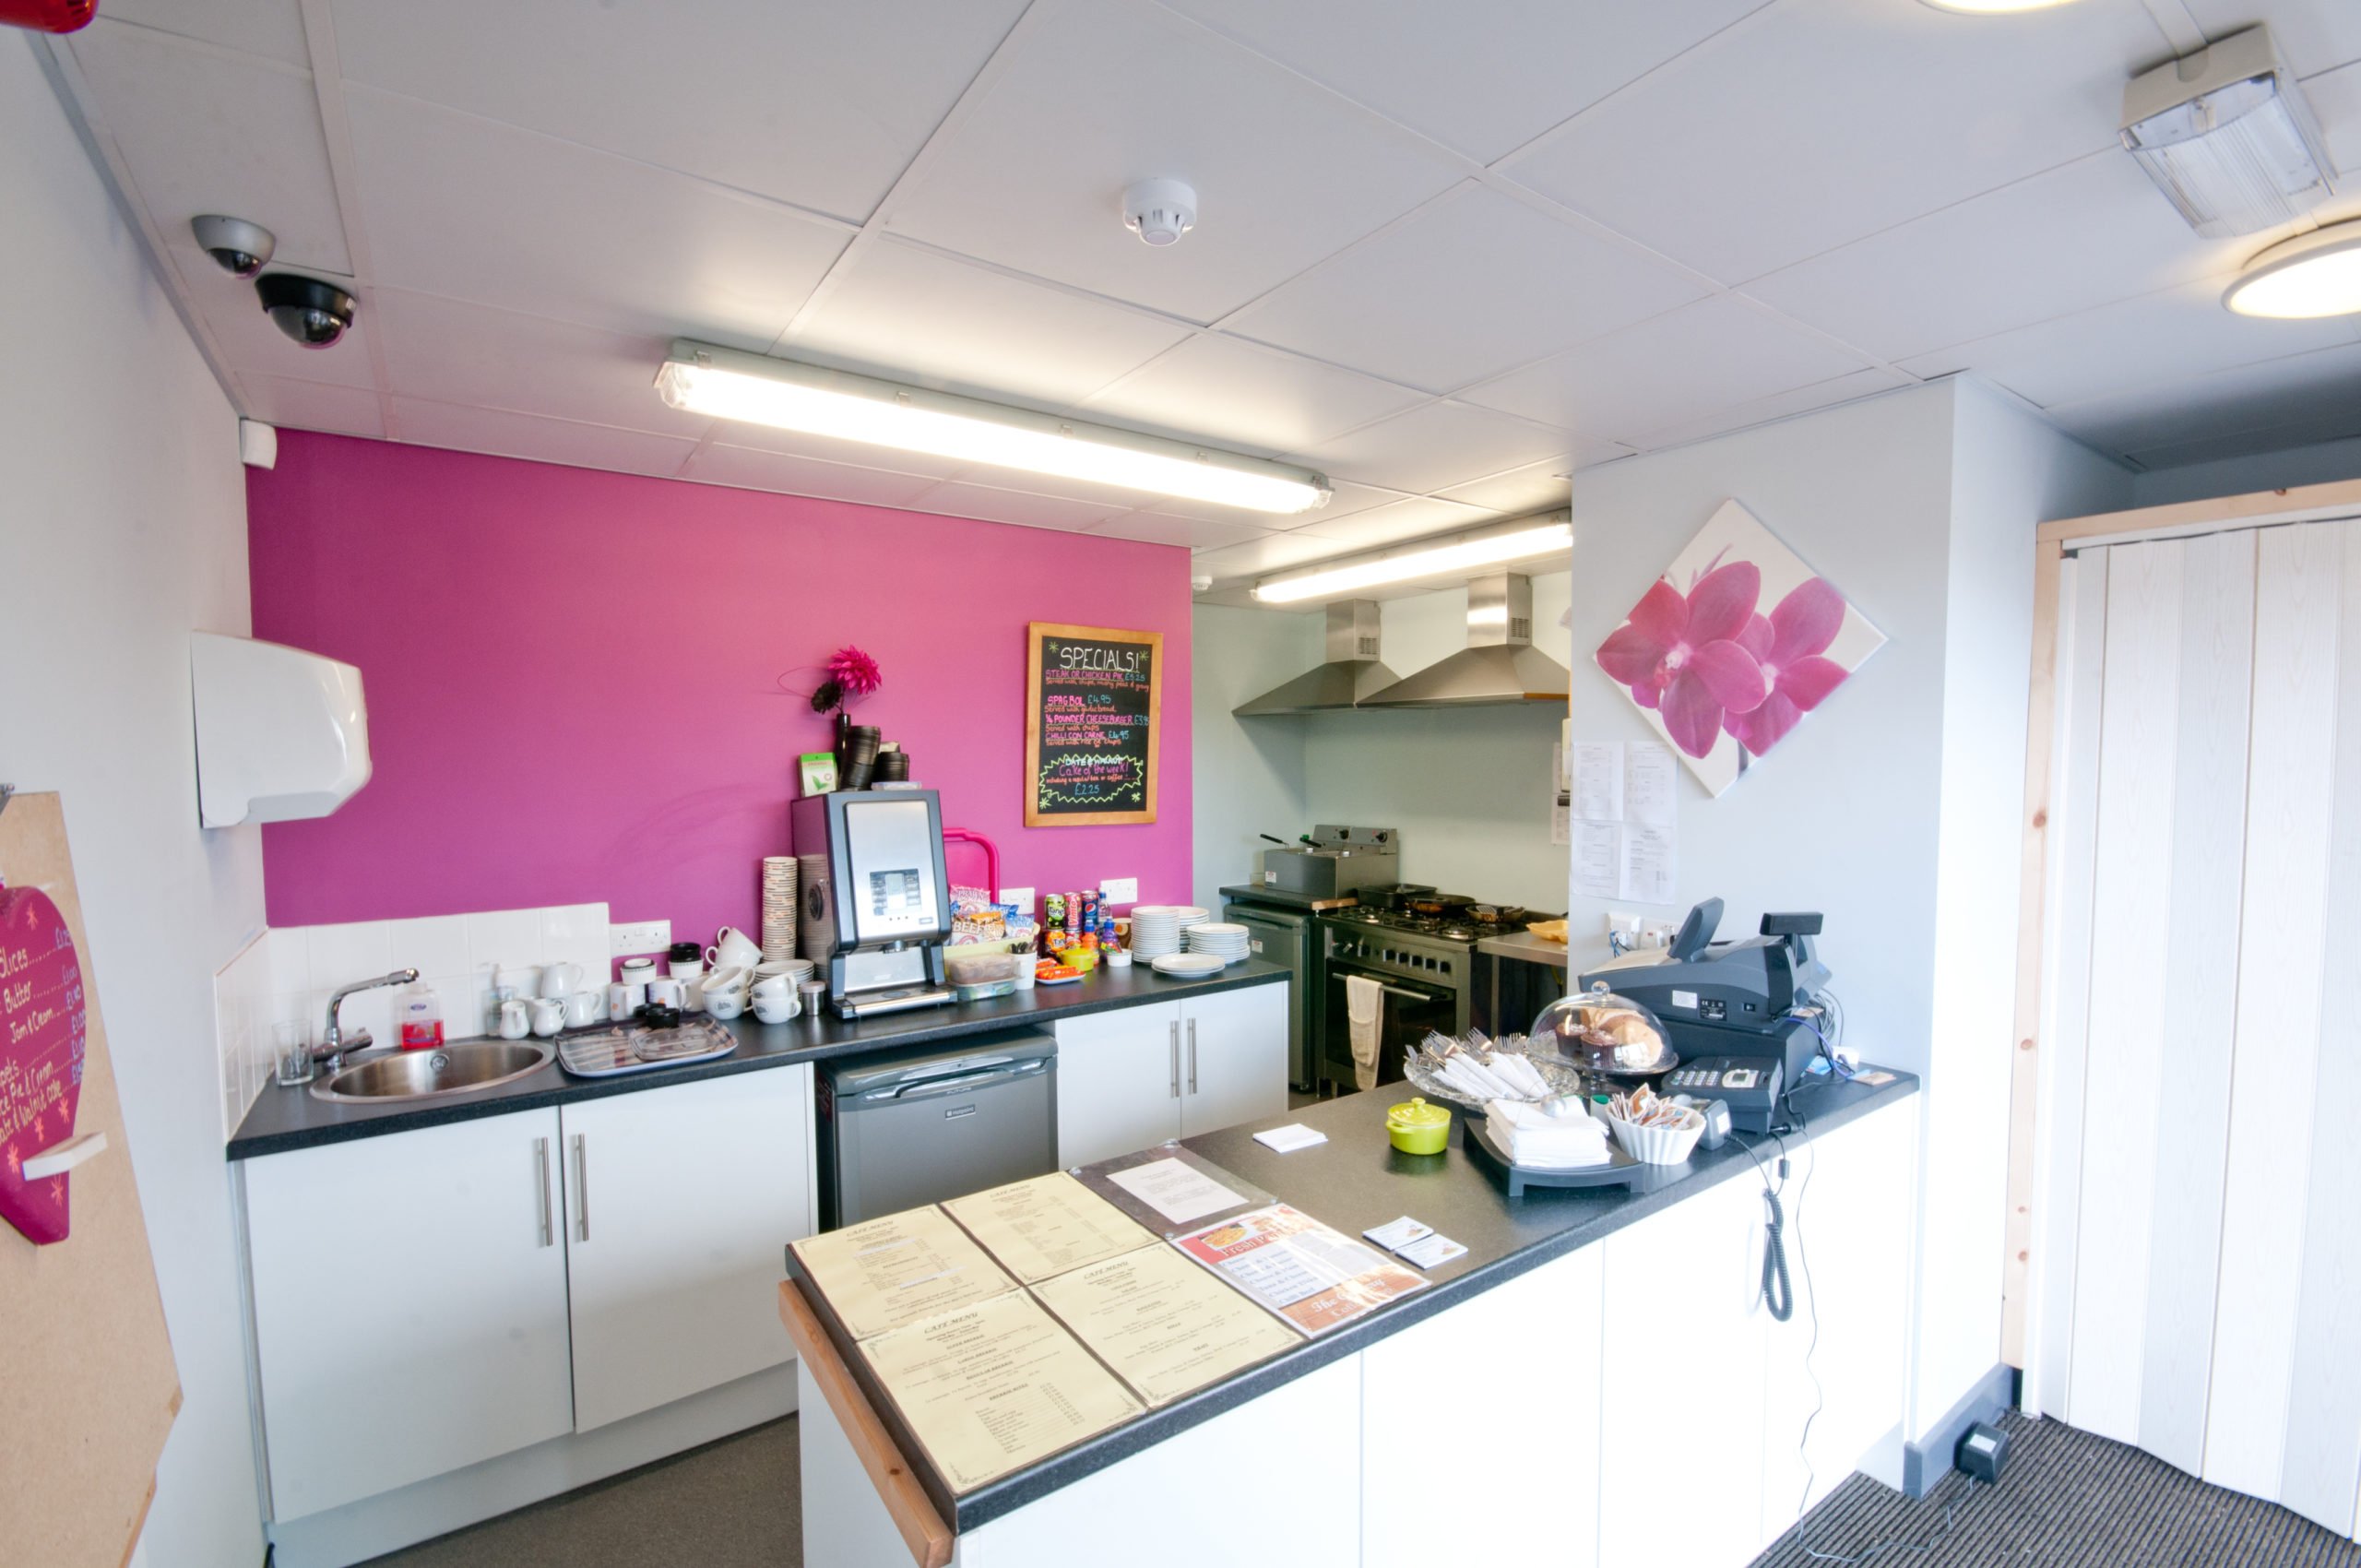 A café with a pink wall.